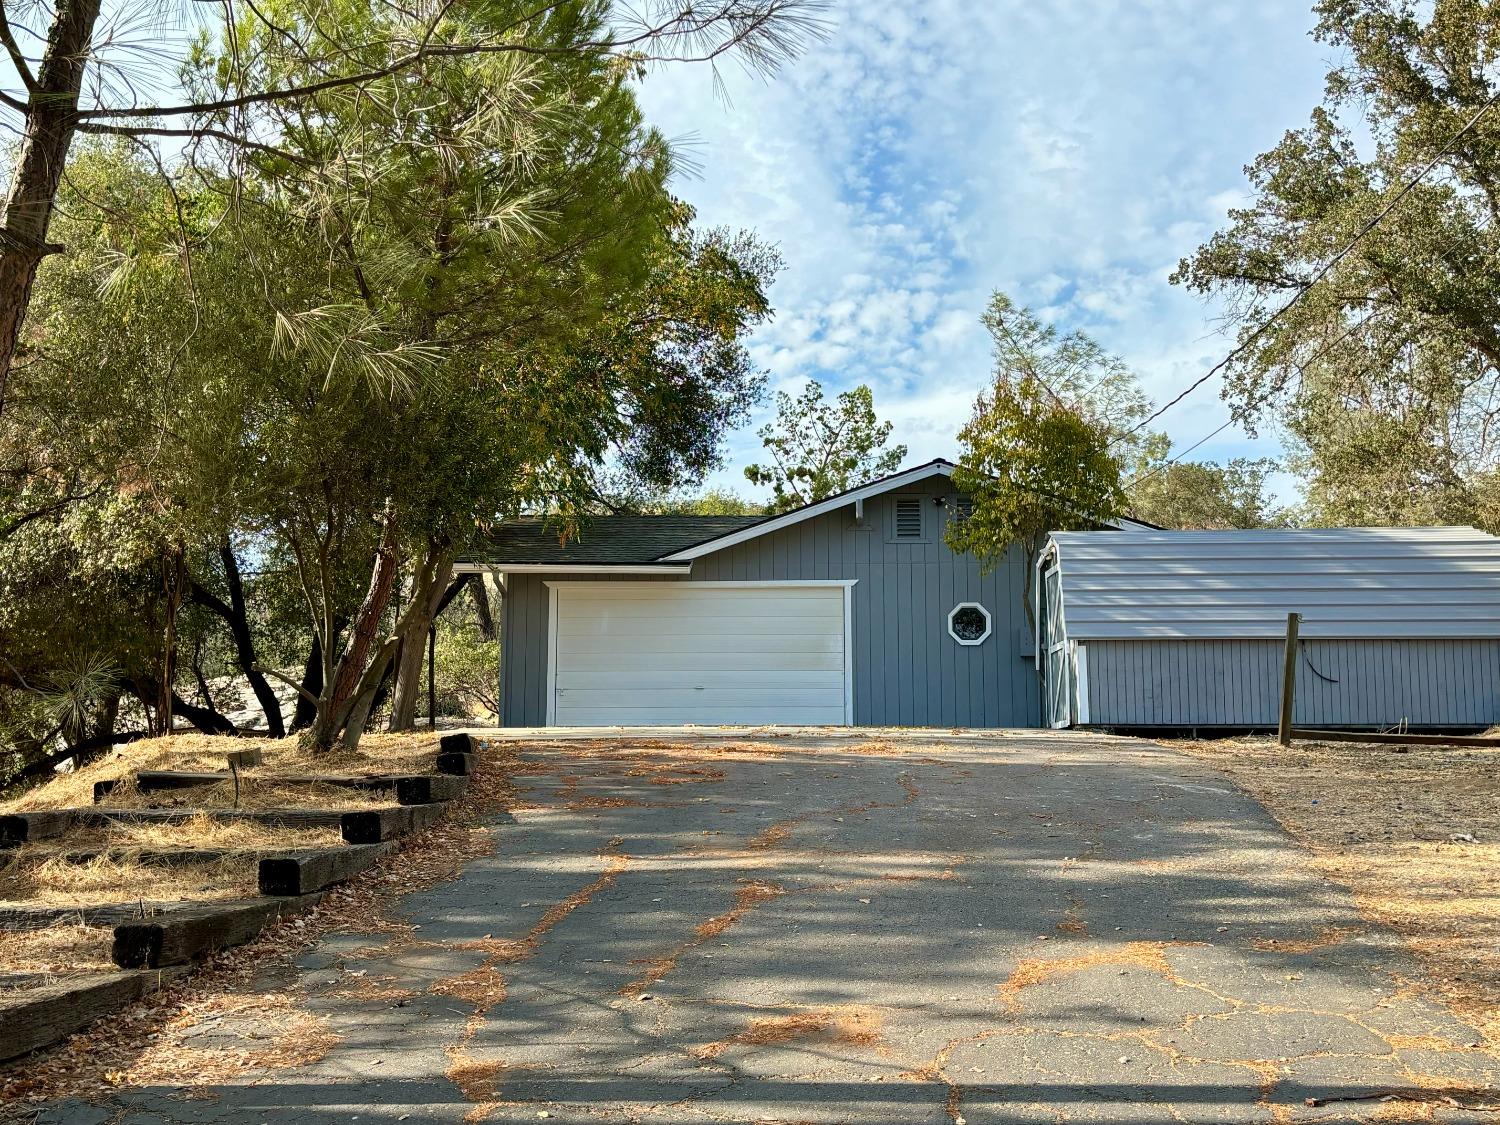 Photo of 42571 Long Hollow Dr in Coarsegold, CA